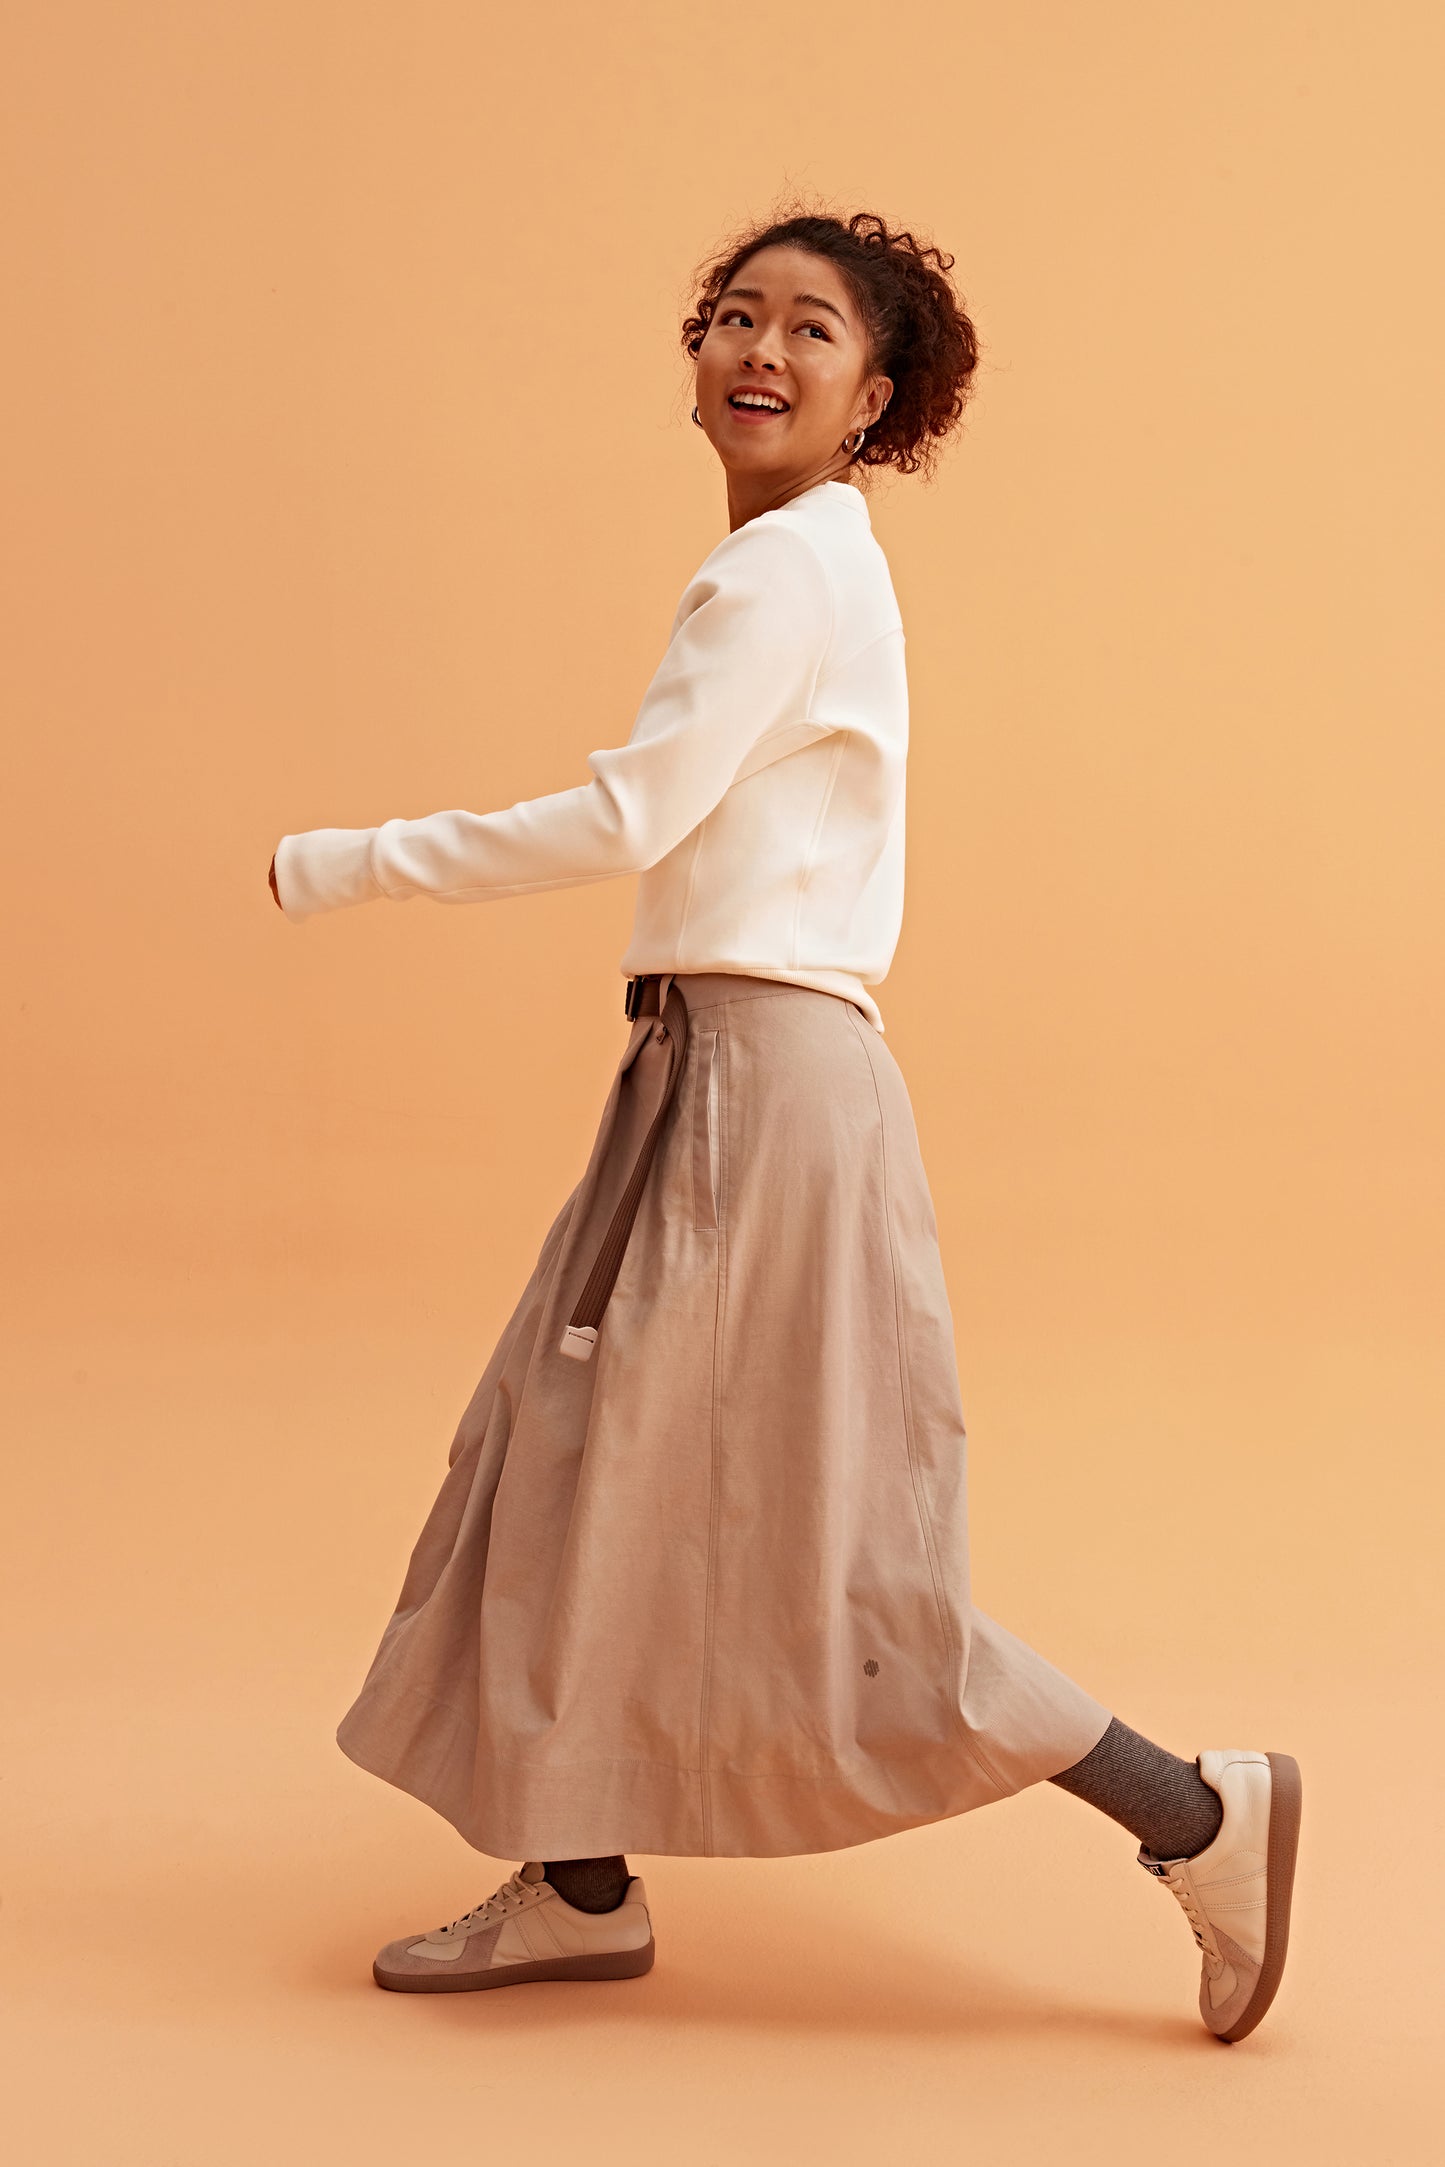 side of a woman wearing a white sweatshirt and brown skirts.